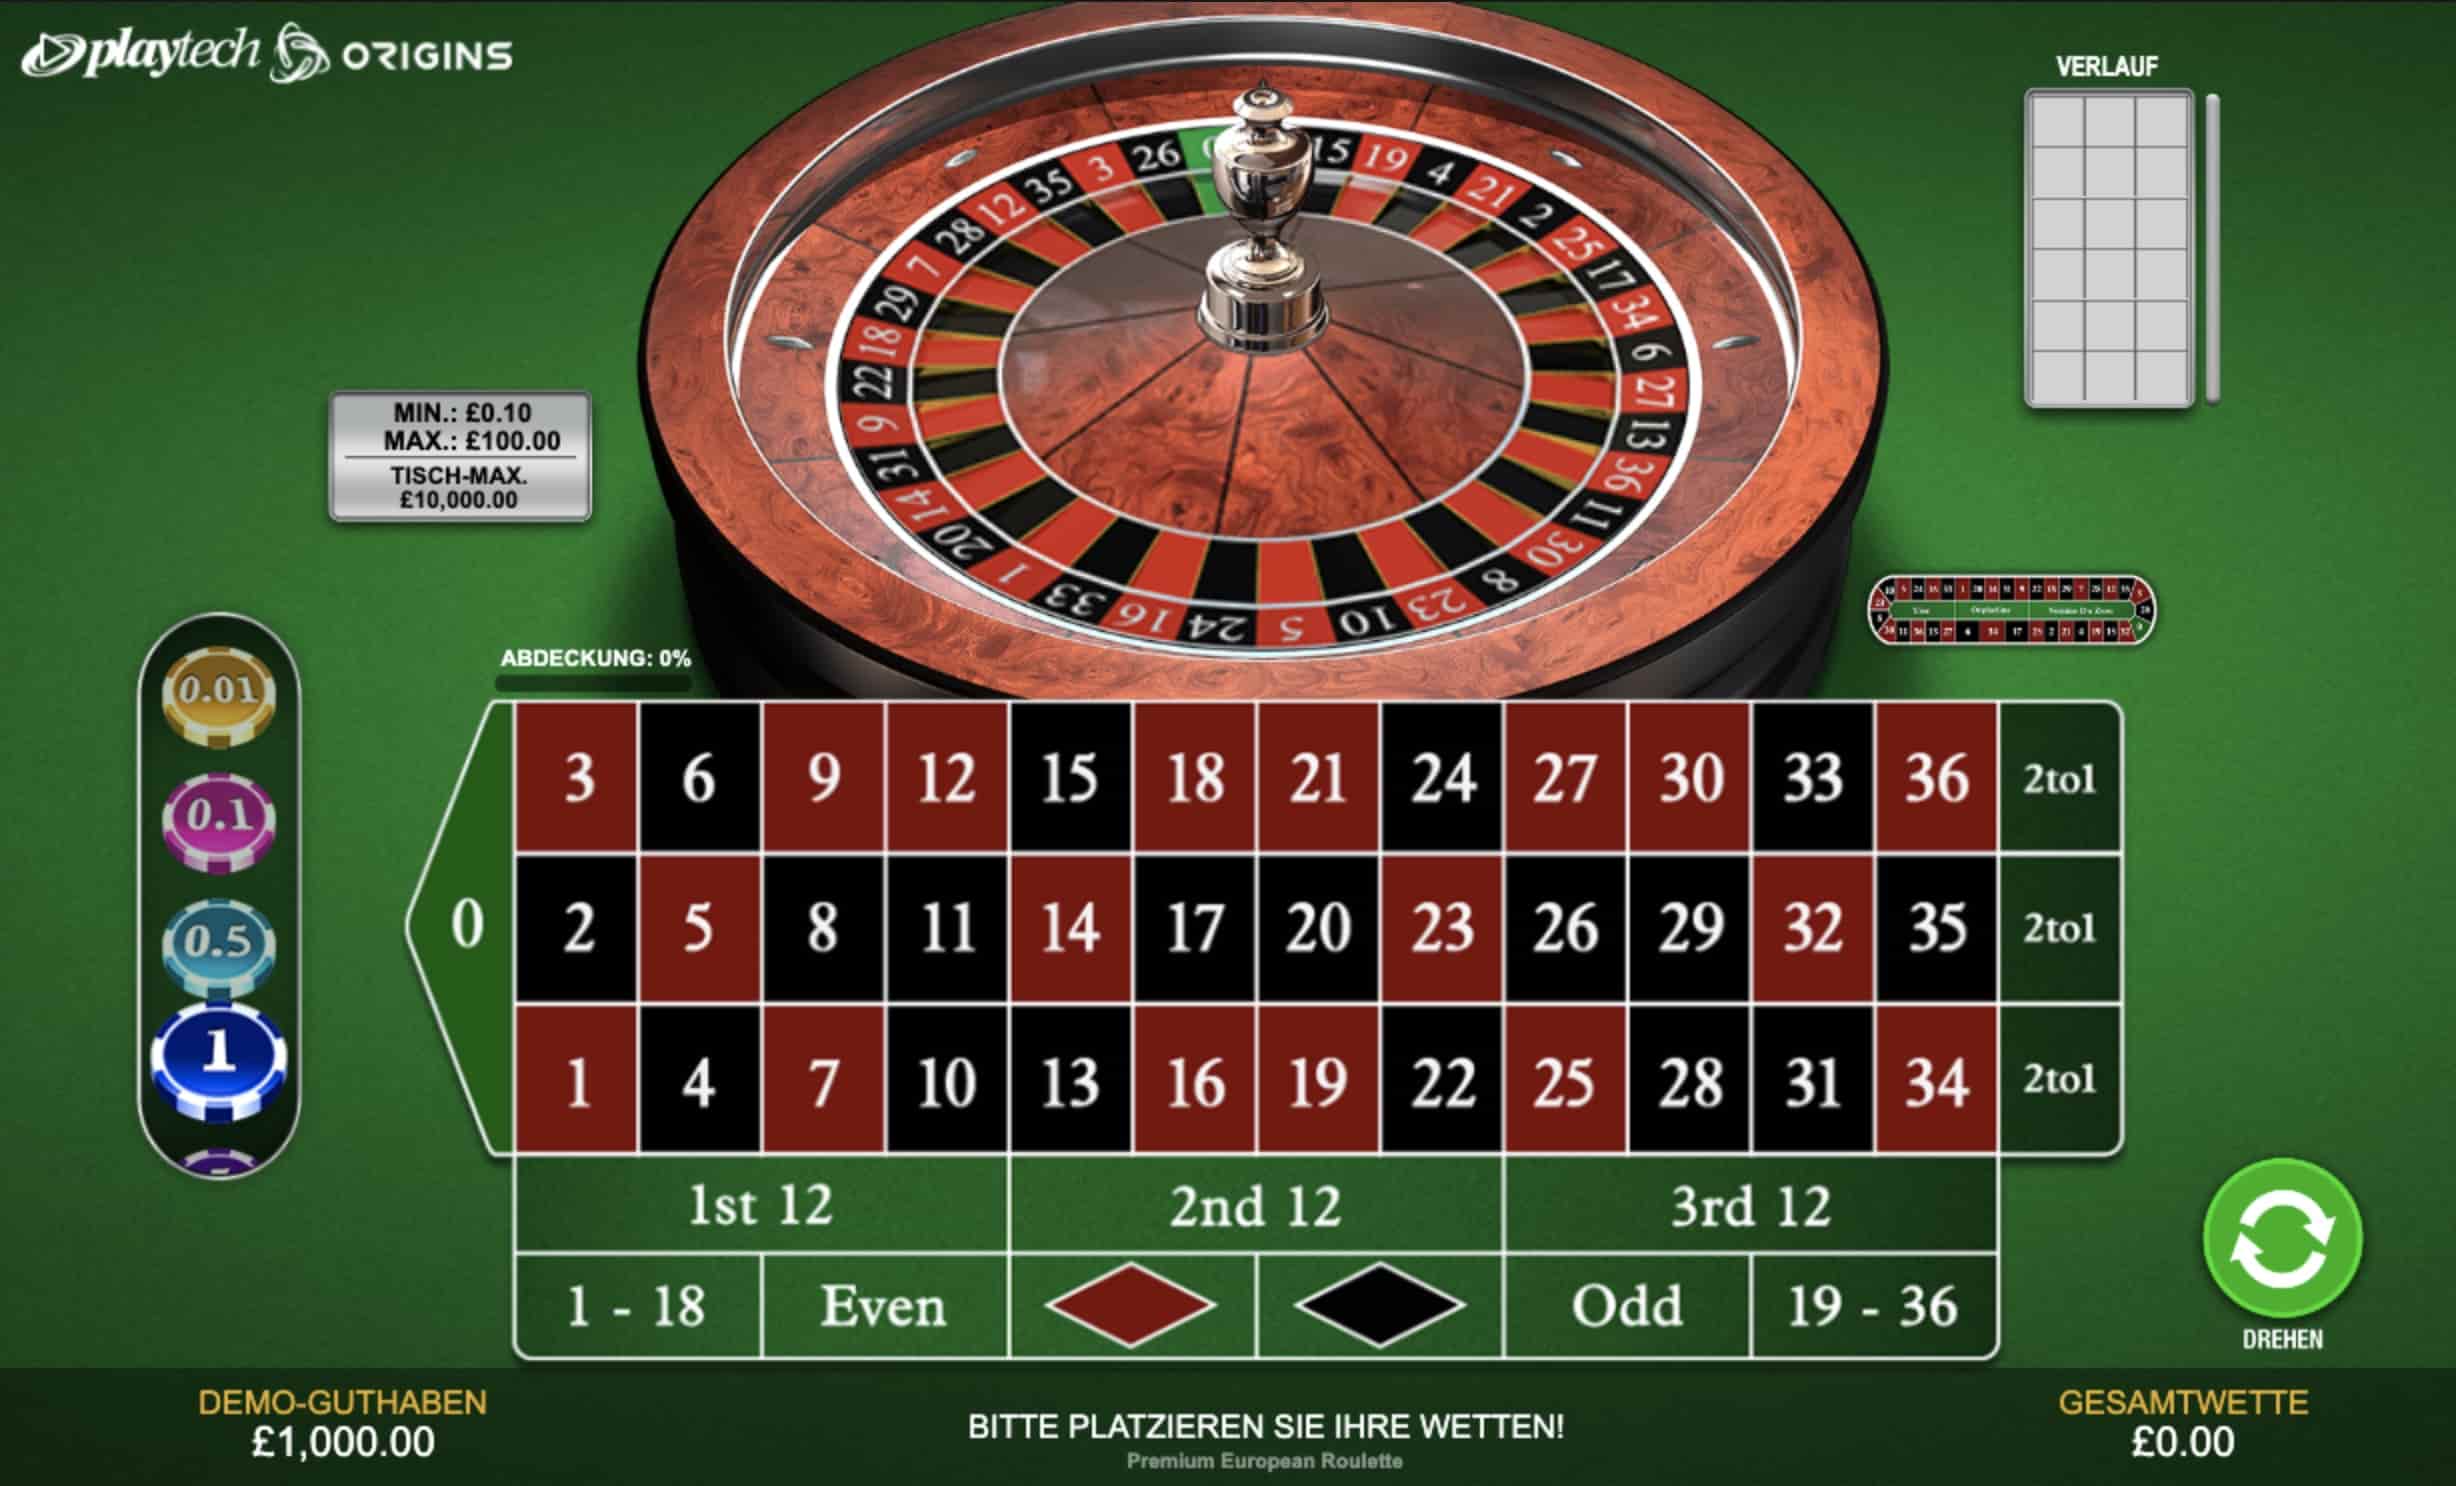 The Complete Guide To Understanding roulette